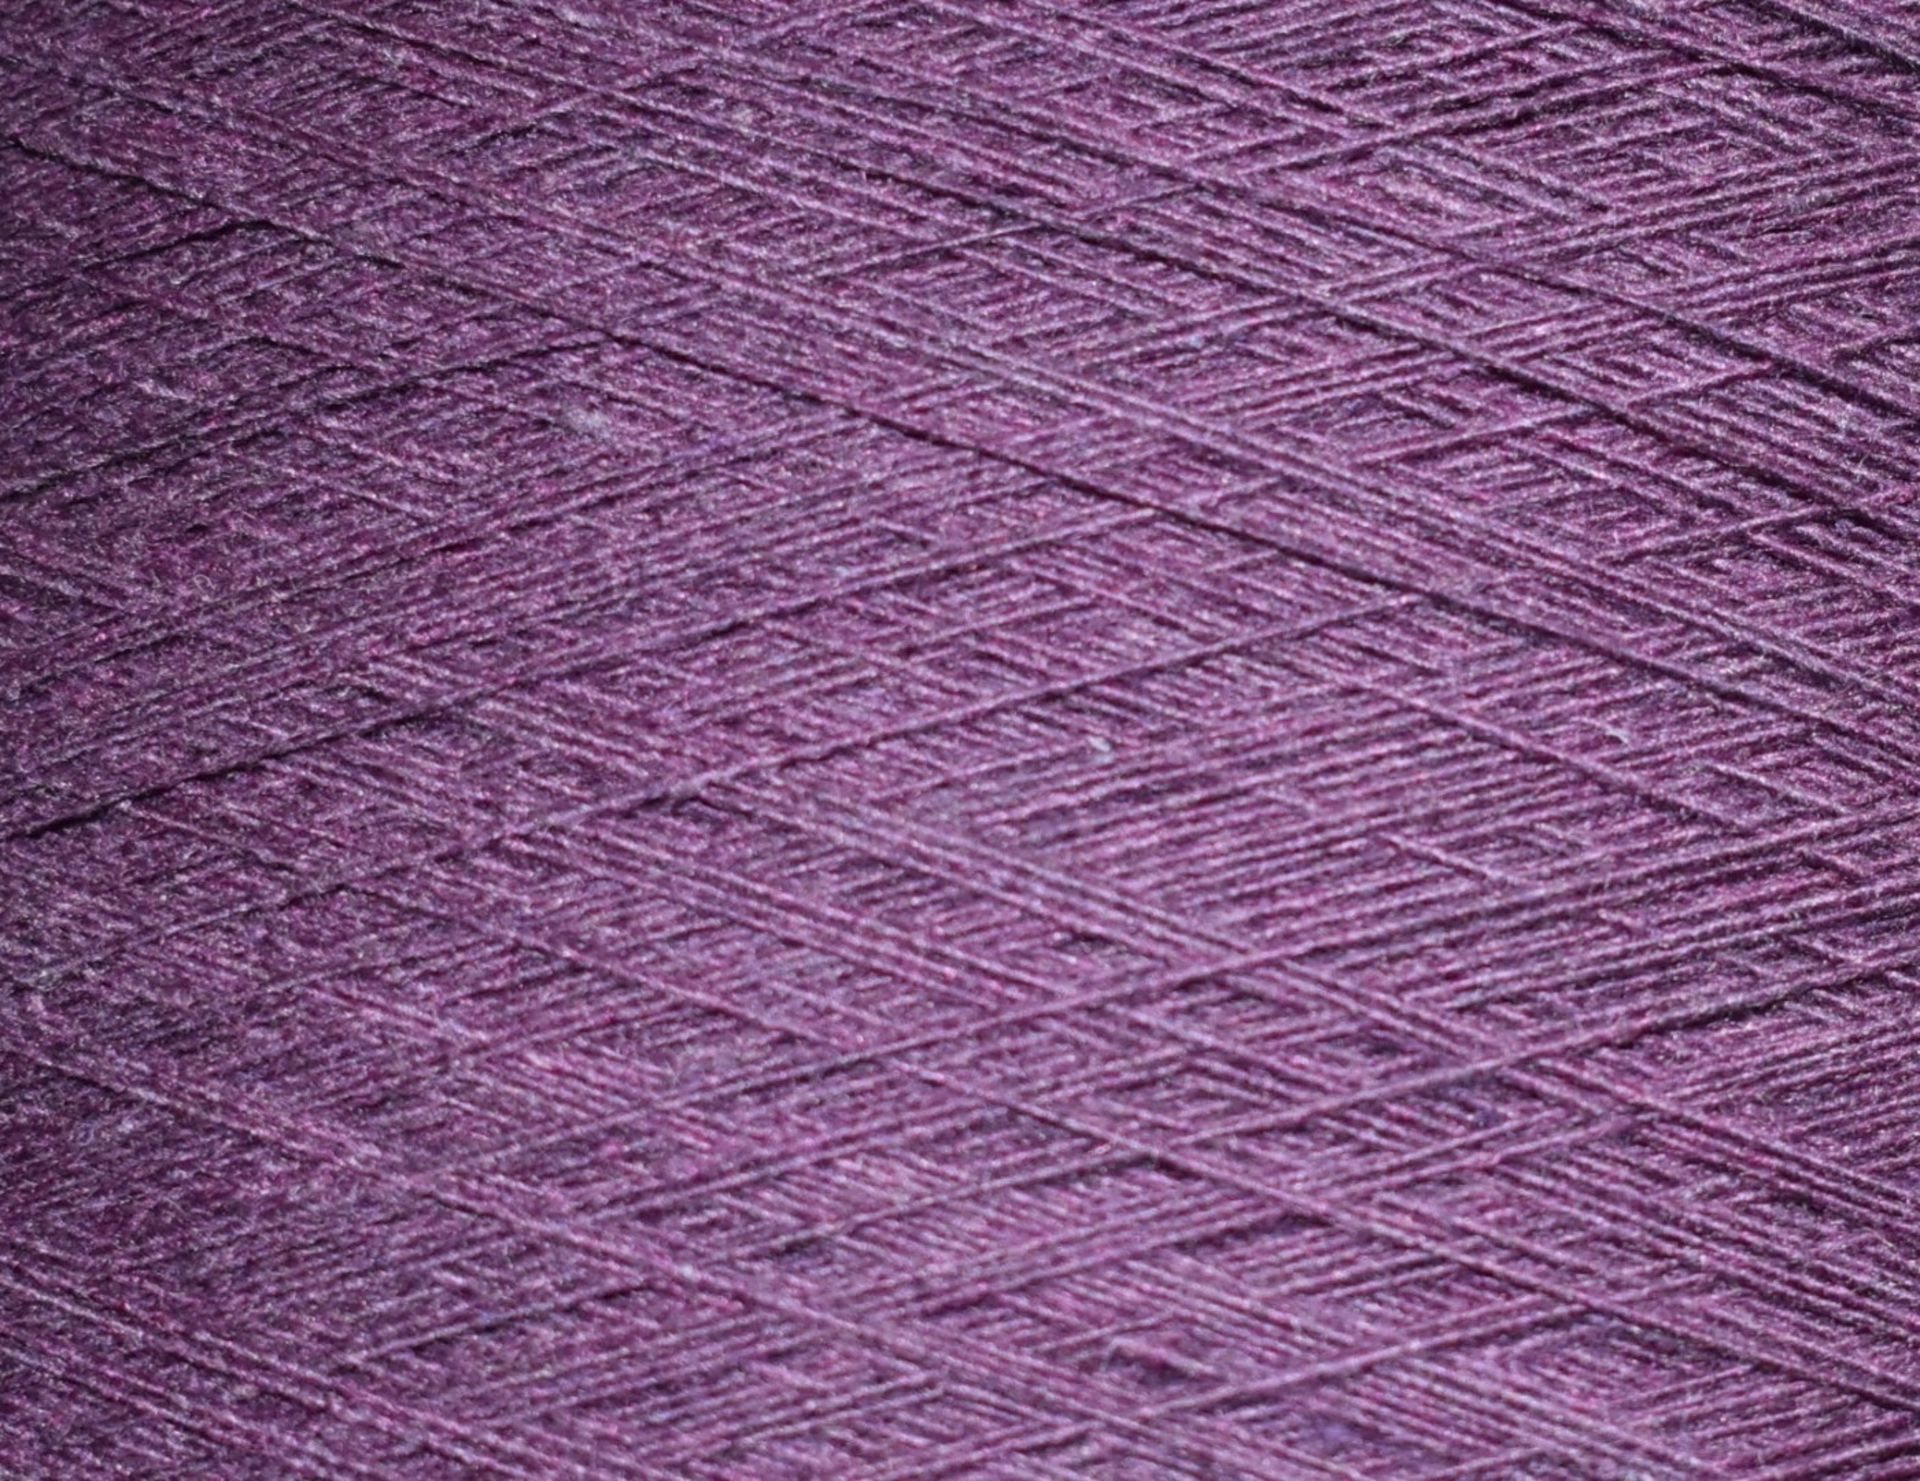 1 x Cone of 1/13 MicroCotton Knitting Yarn - Purple - Approx Weight: 2,300g - New Stock ABL Yarn - Image 9 of 13